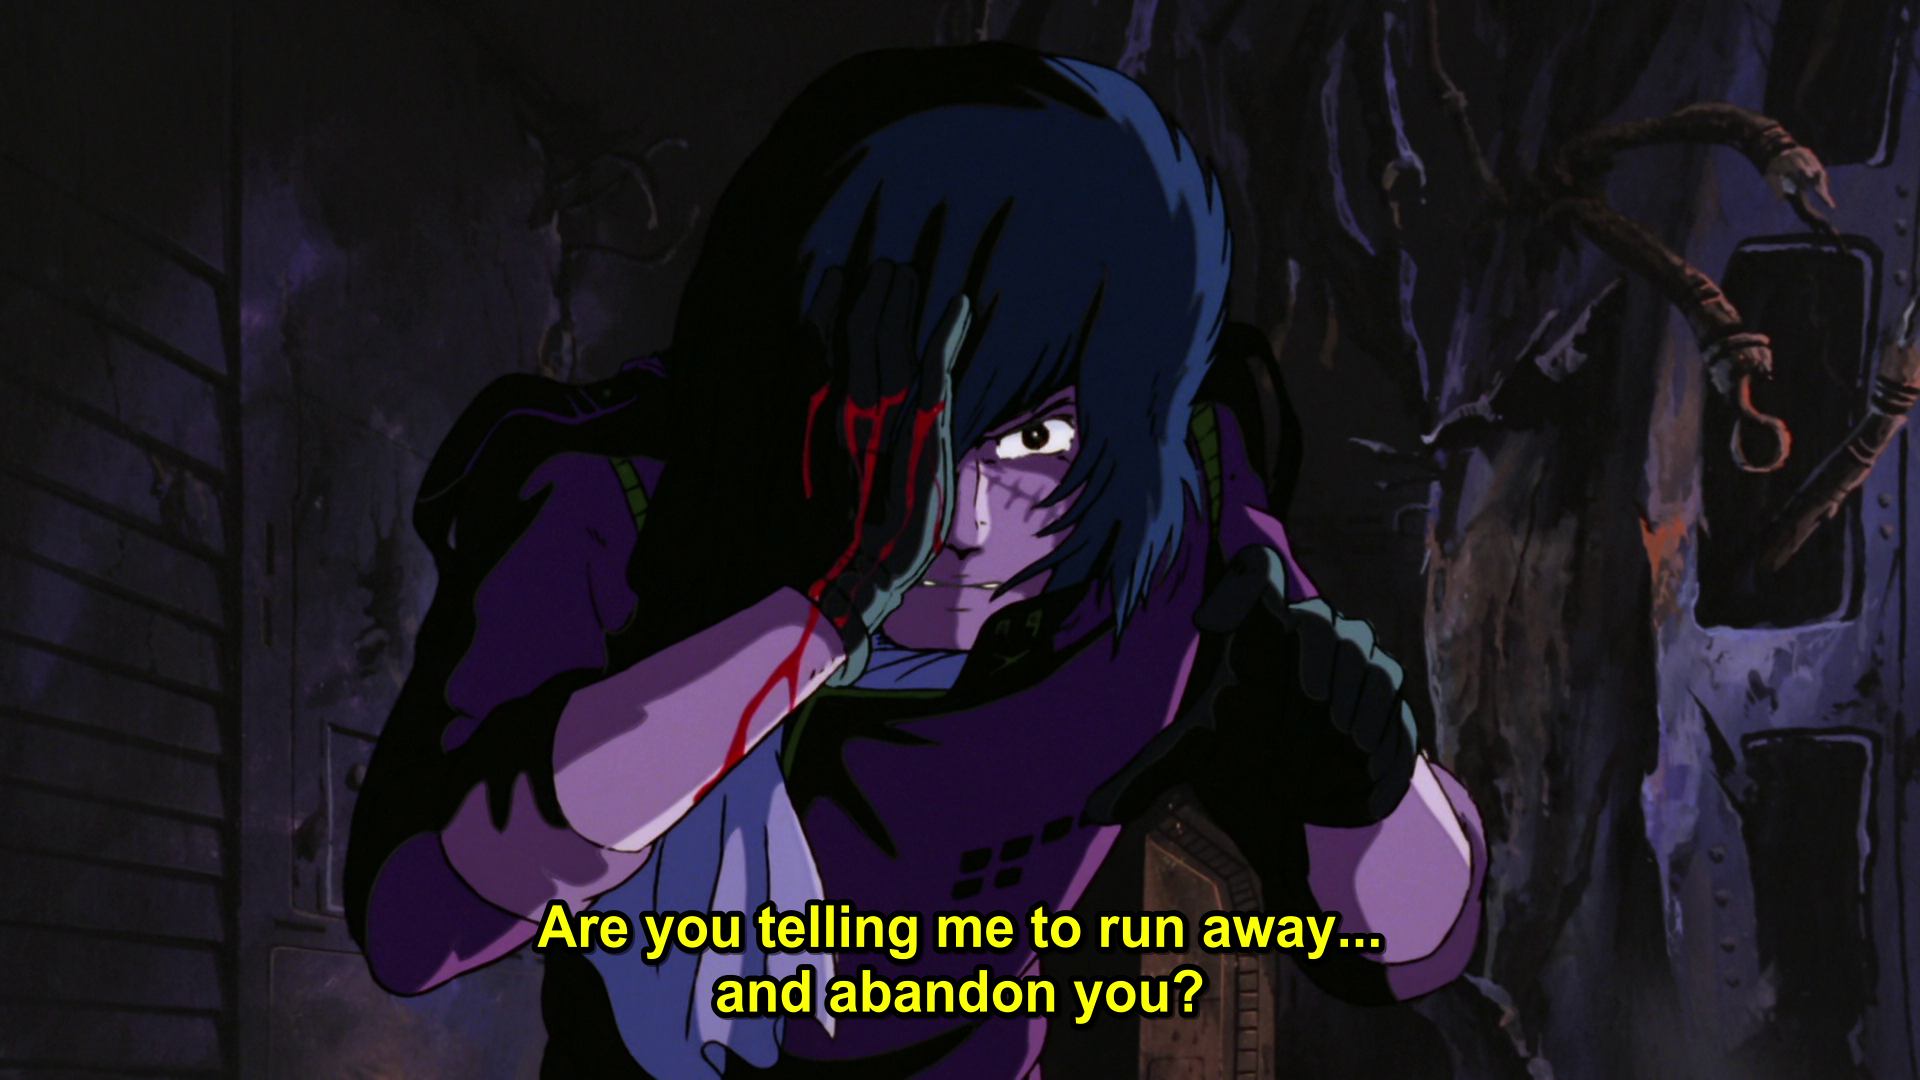 Harlock reaching towards Maya, covering his eye that was shot. Blood is dripping down like he is crying. He says Are you telling me to run away... and abandon you?